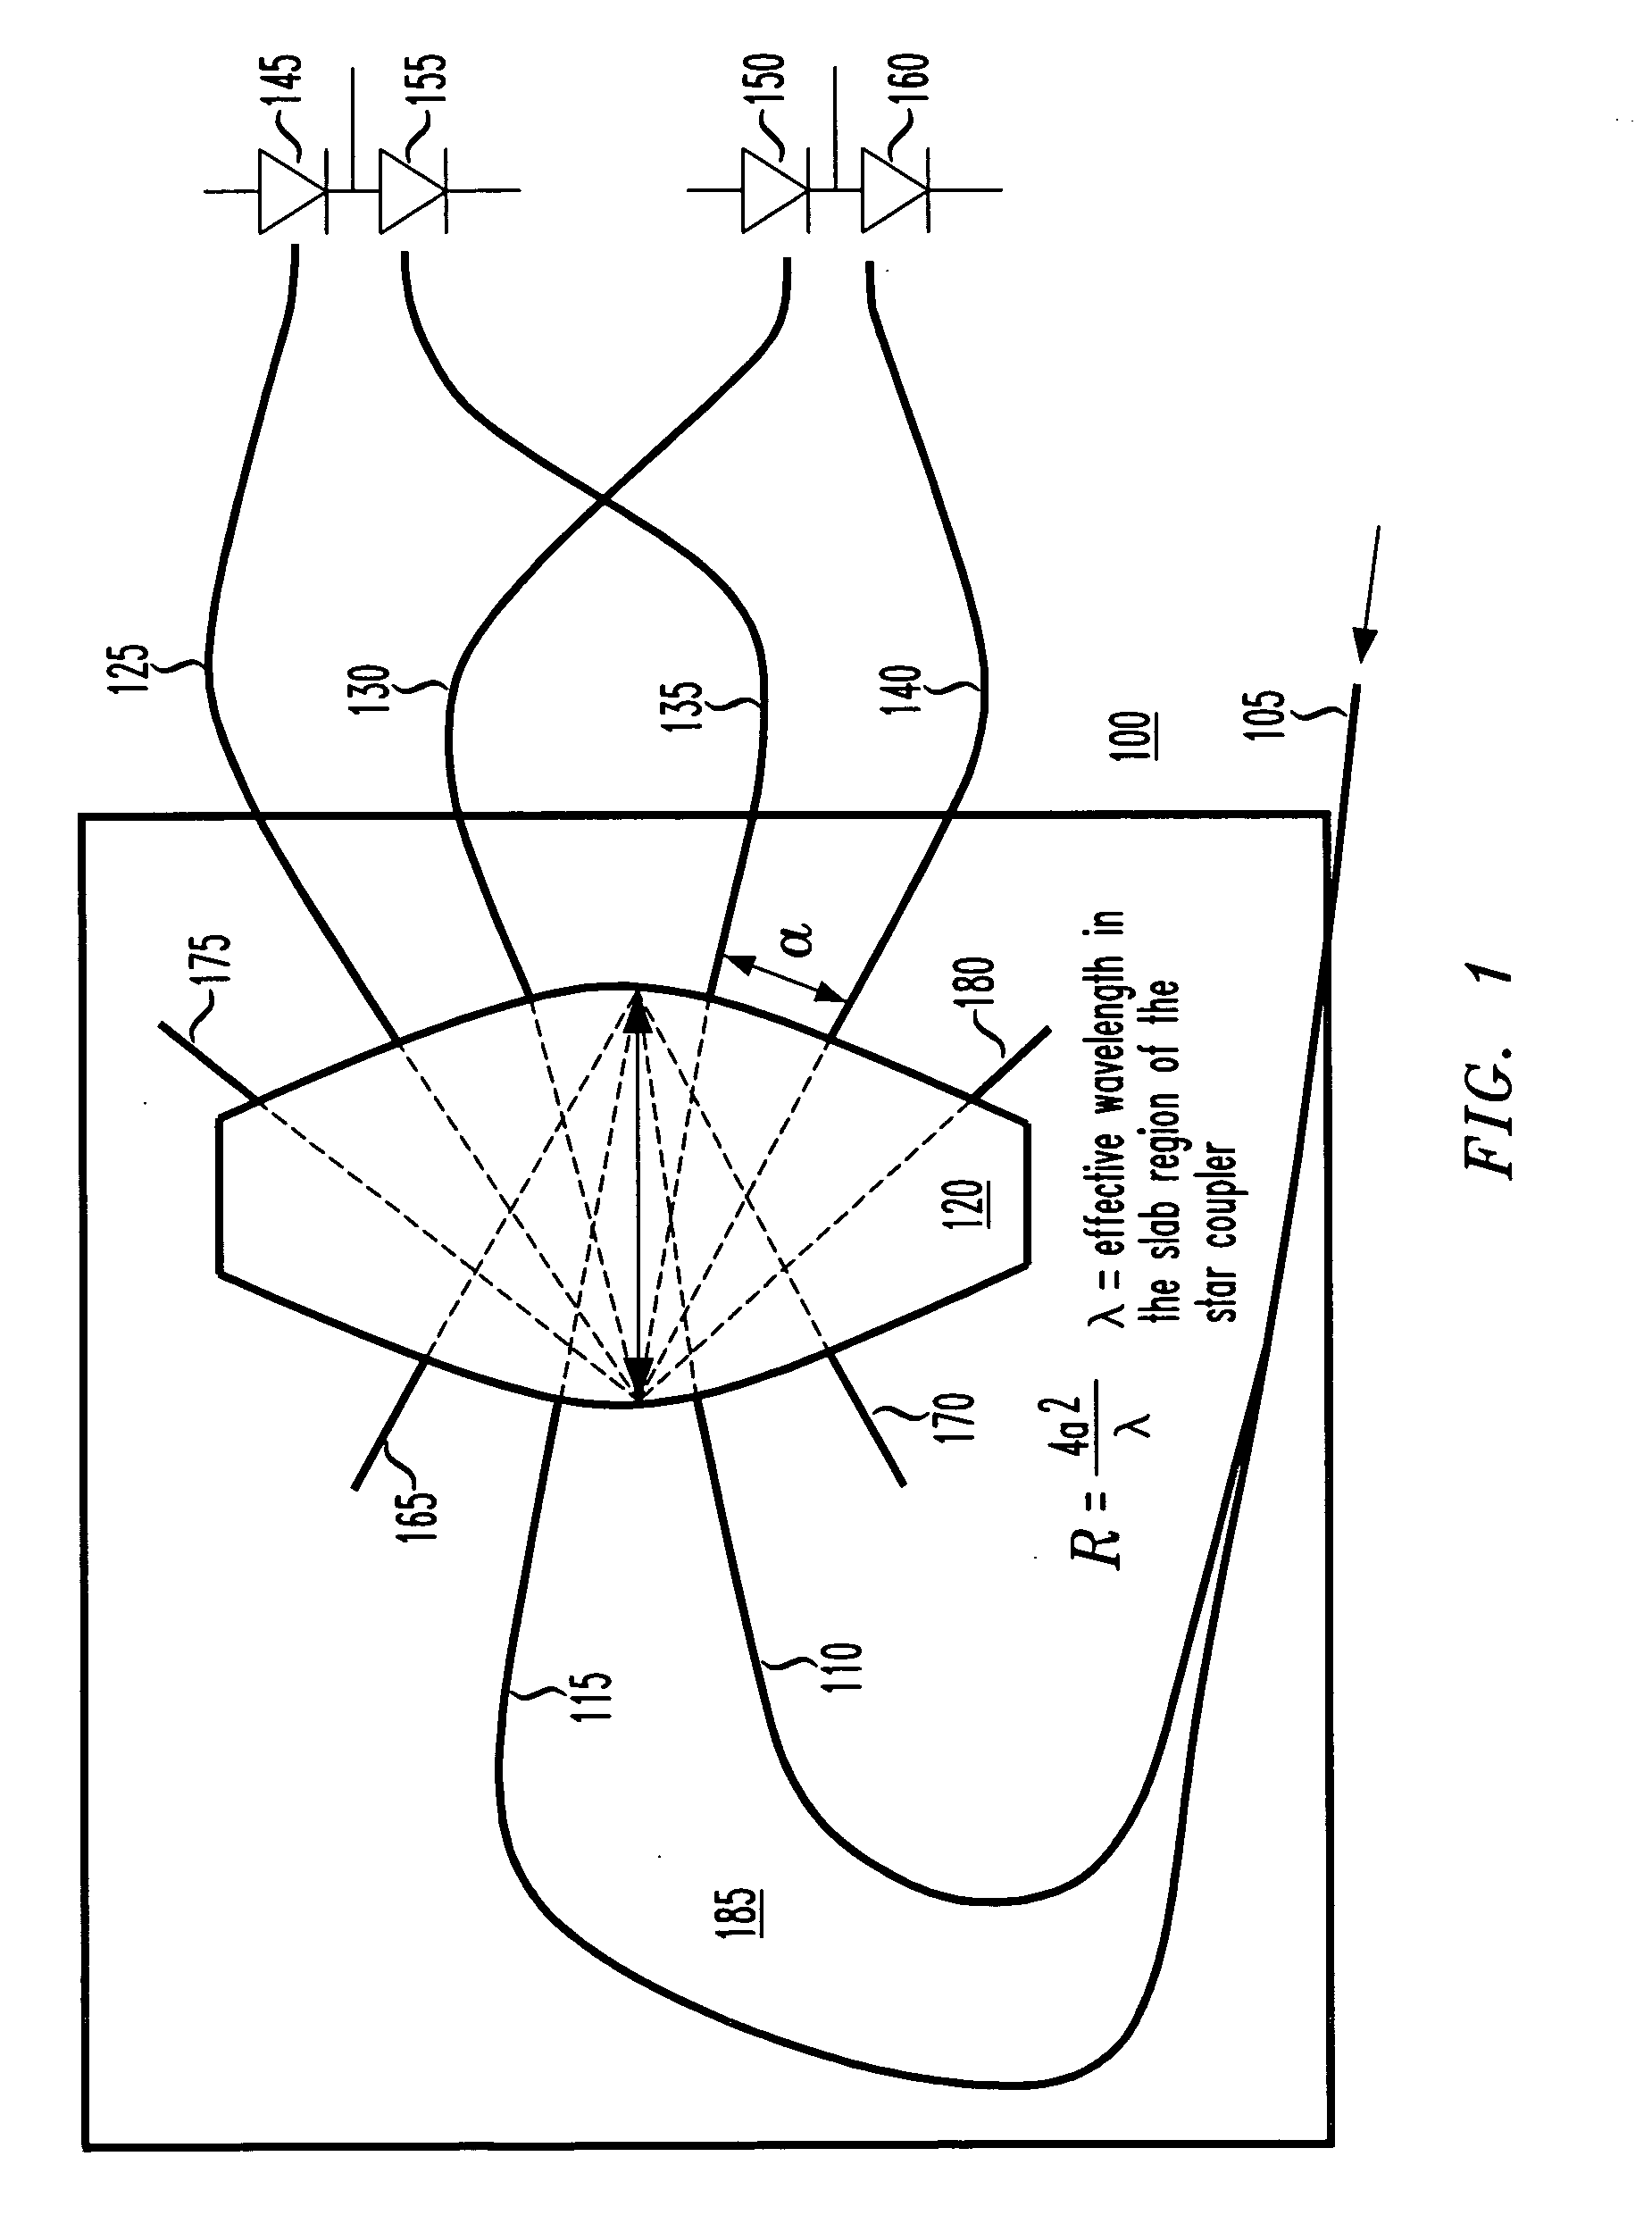 Apparatus and method for receiving a quadrature differential phase shift key modulated optical pulsetrain